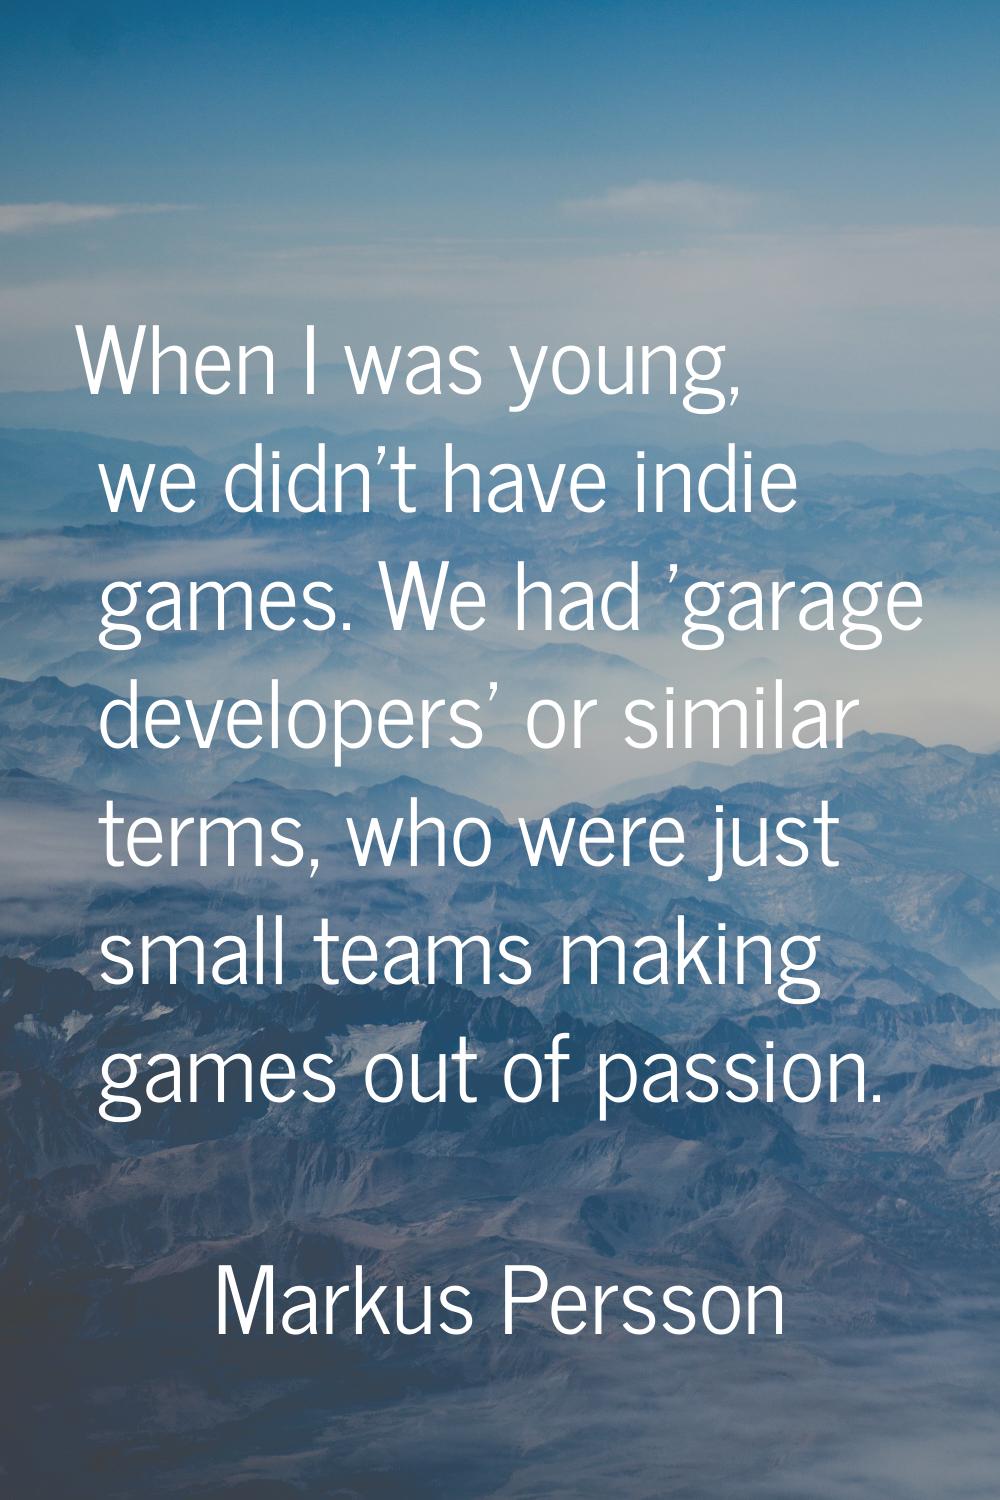 When I was young, we didn't have indie games. We had 'garage developers' or similar terms, who were